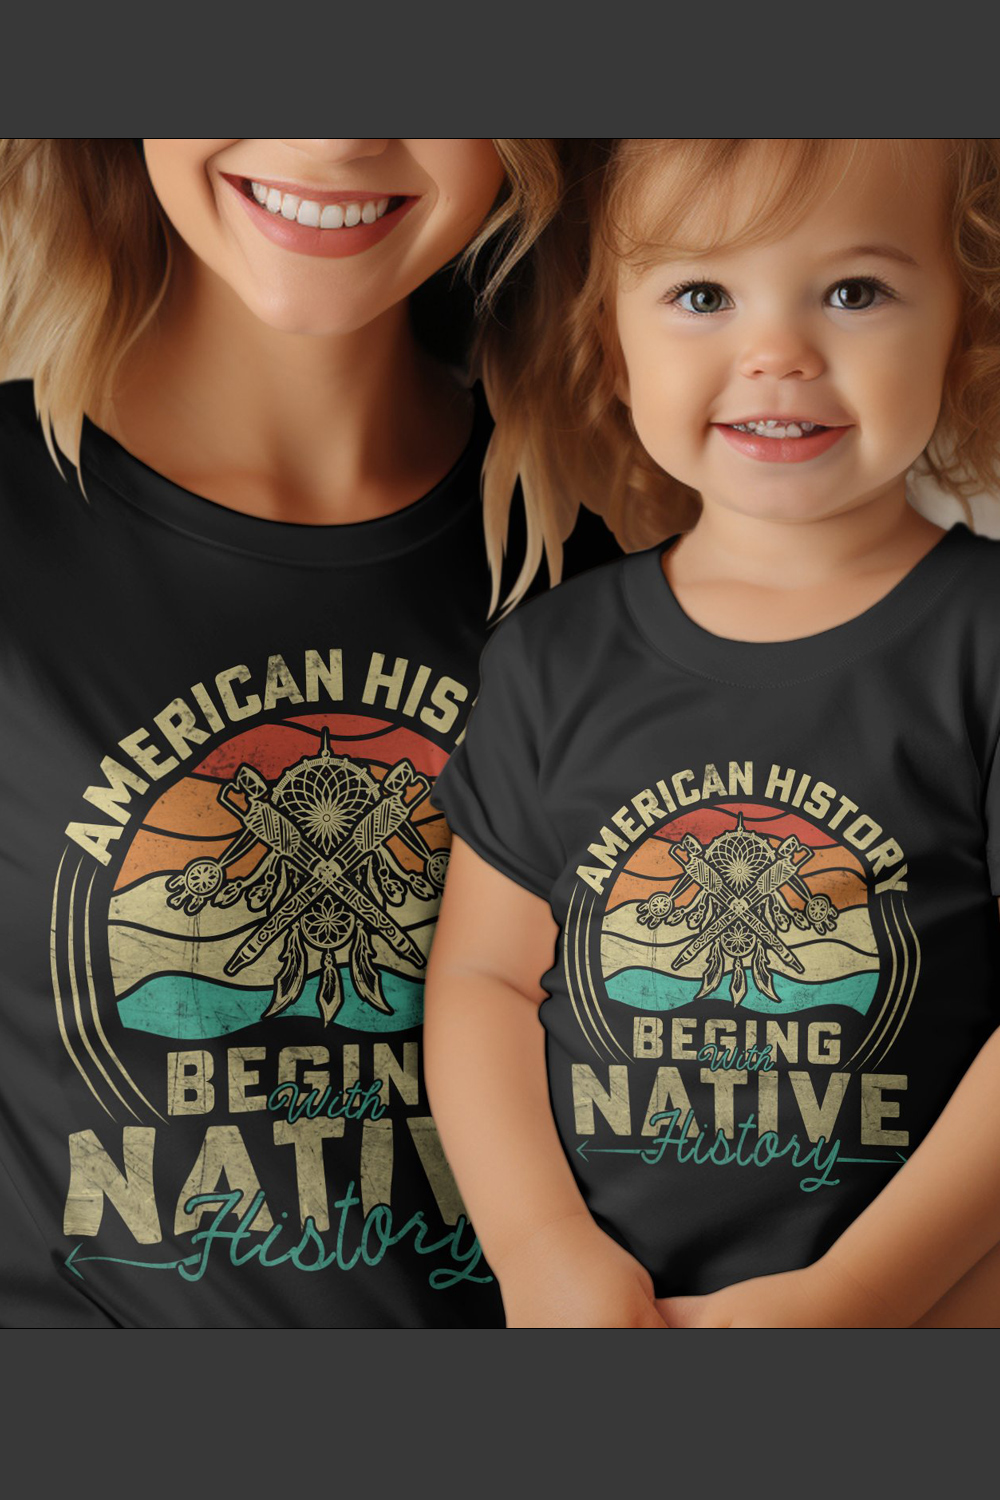 American History Begins with Native History, Native American T-Shirts, Native American Pride Shirts pinterest preview image.